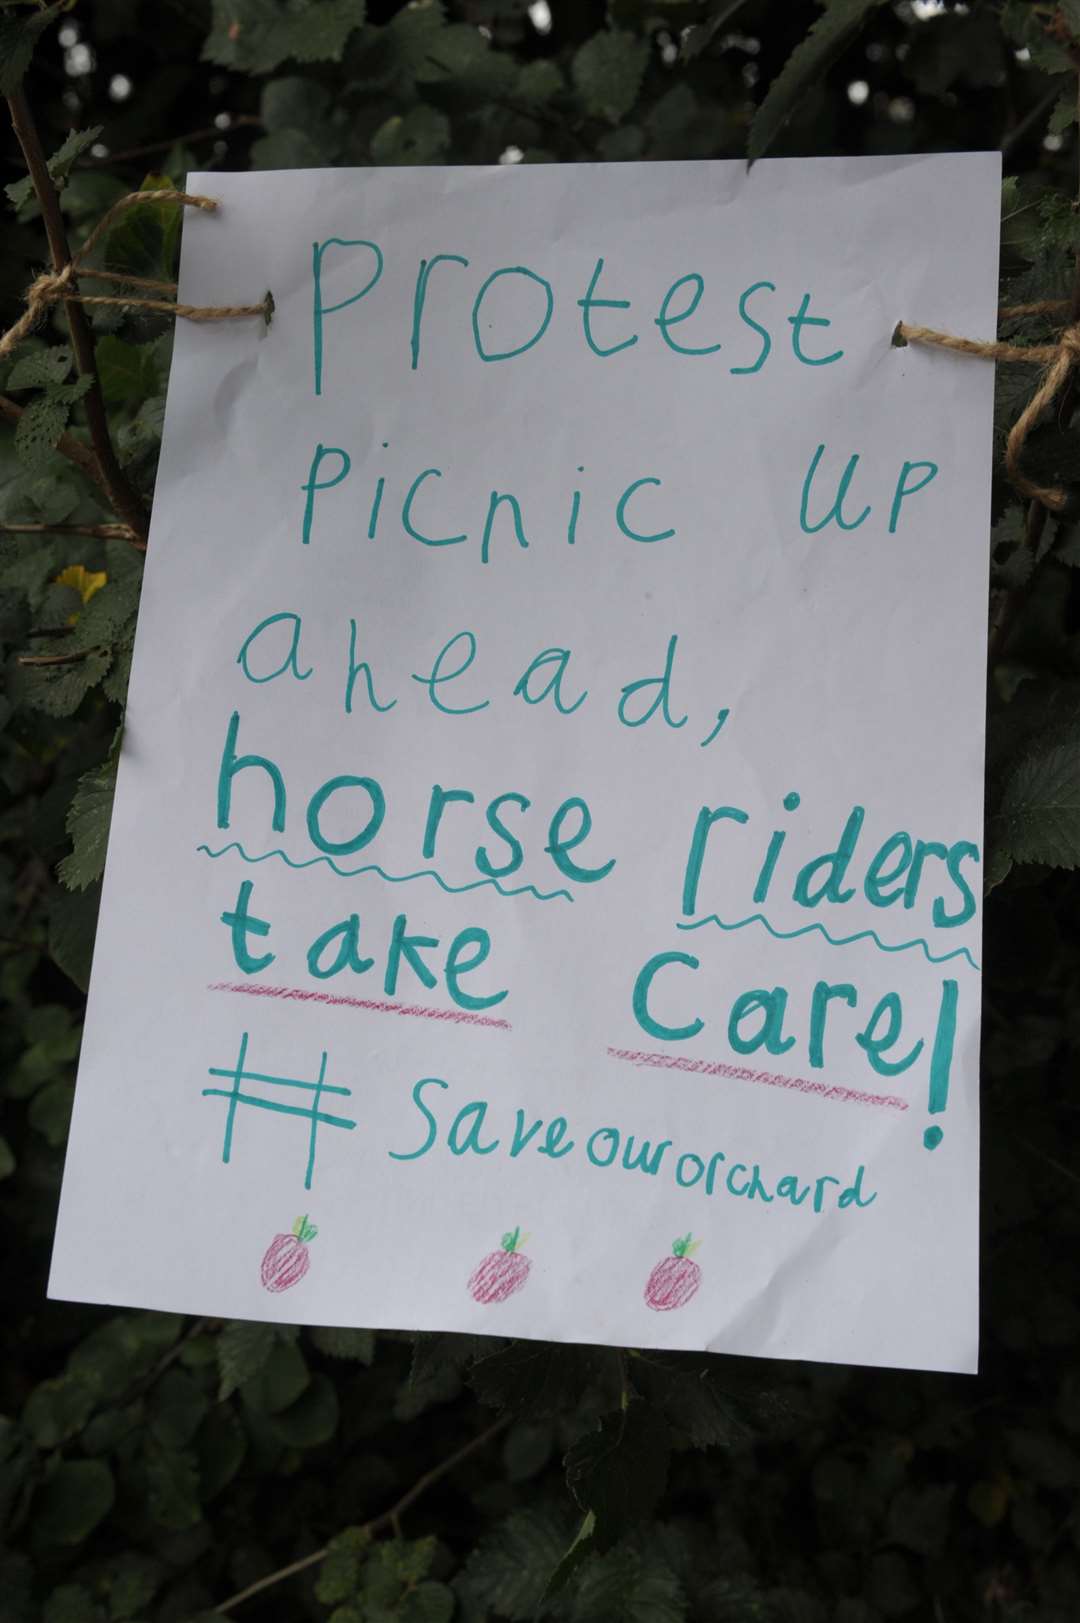 Orchard between Pump Lane and Lower Bloors Lane..Protest picnic..Picture: Steve Crispe. (14405157)